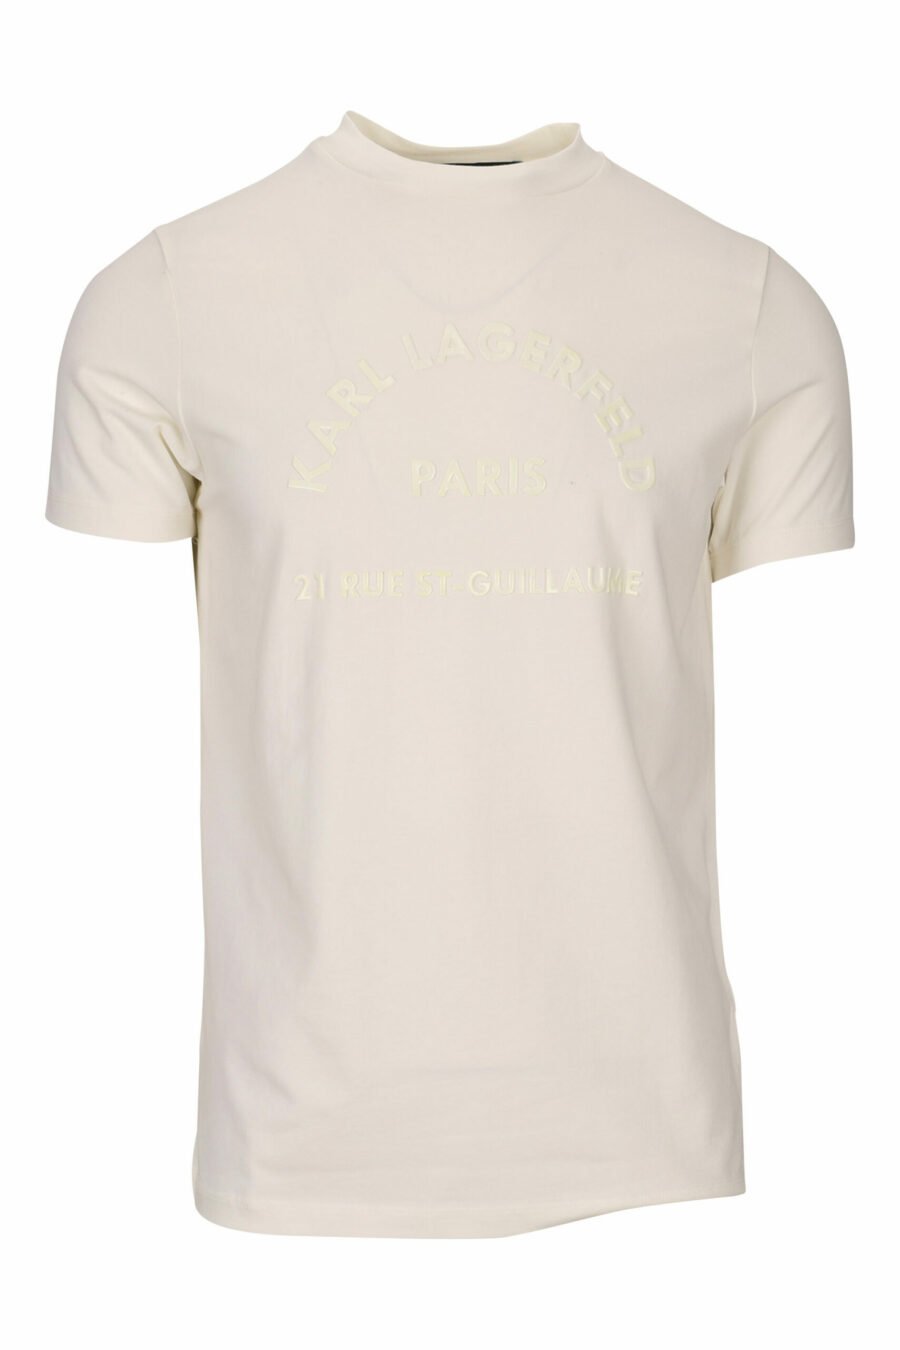 White T-shirt with monochrome "rue st guillaume" maxilogo - 4062226678124 scaled